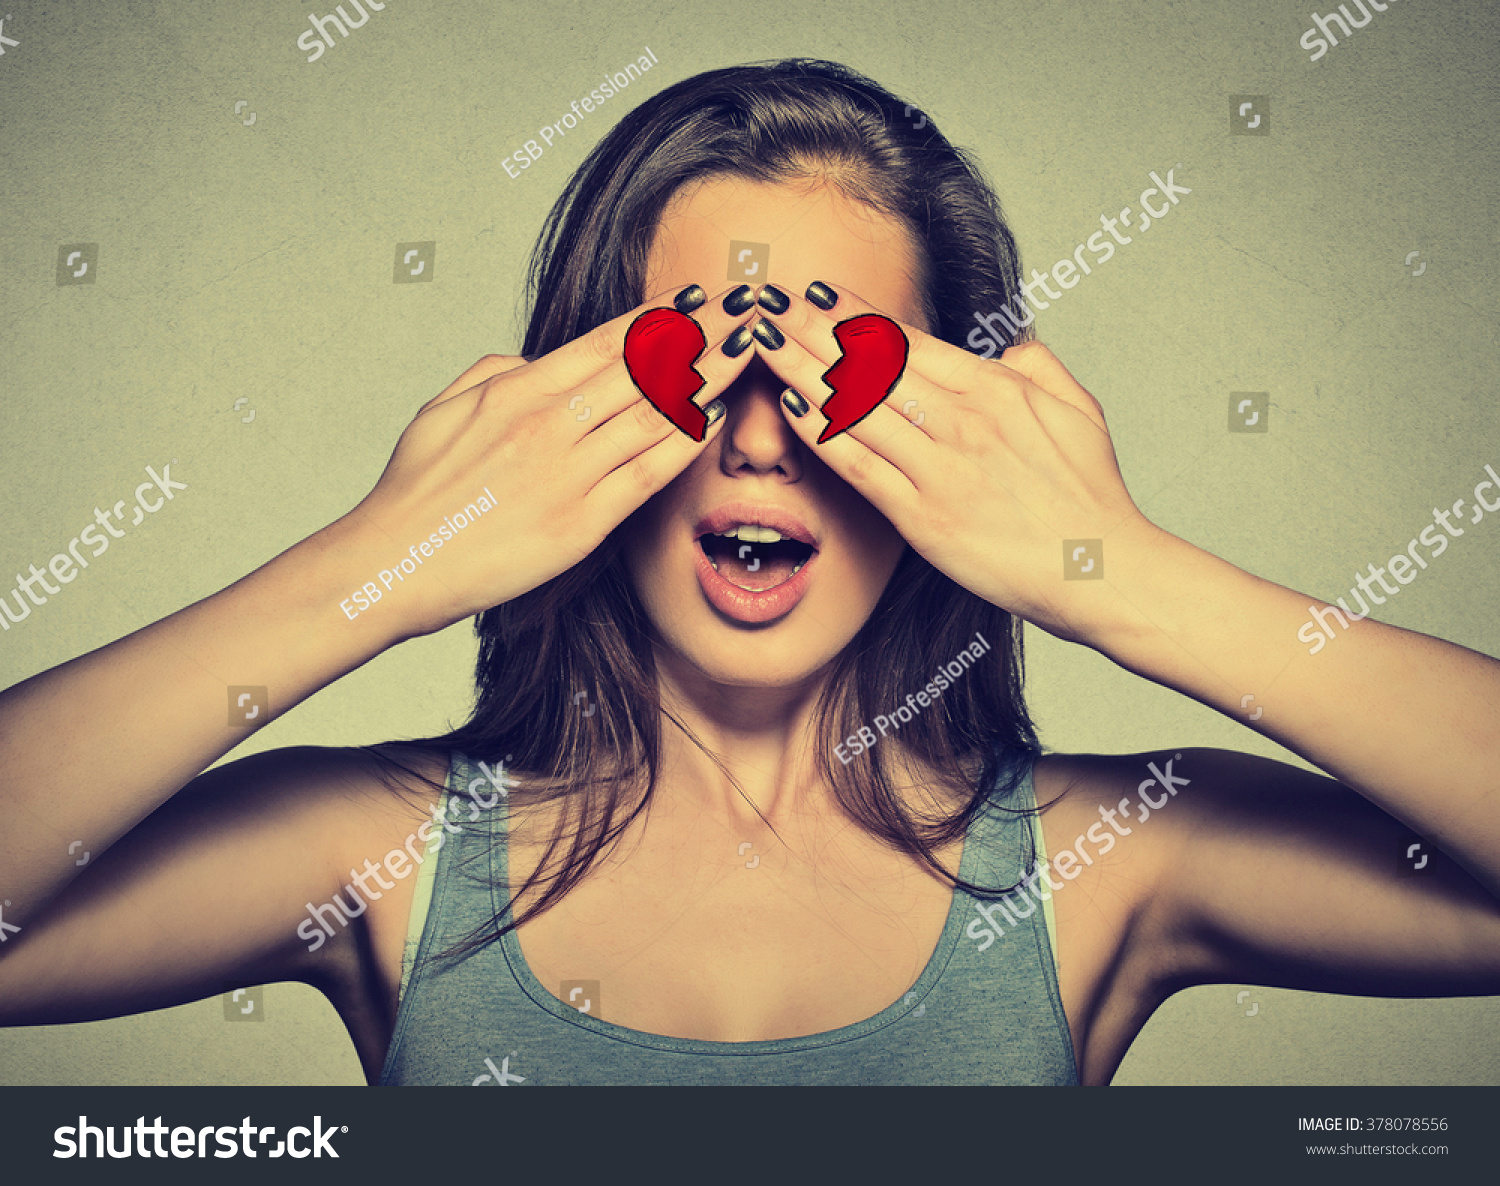 Beautiful young woman eyes covered by hands with broken heart printed on them. Girl in love isolated on gray wall background    #378078556